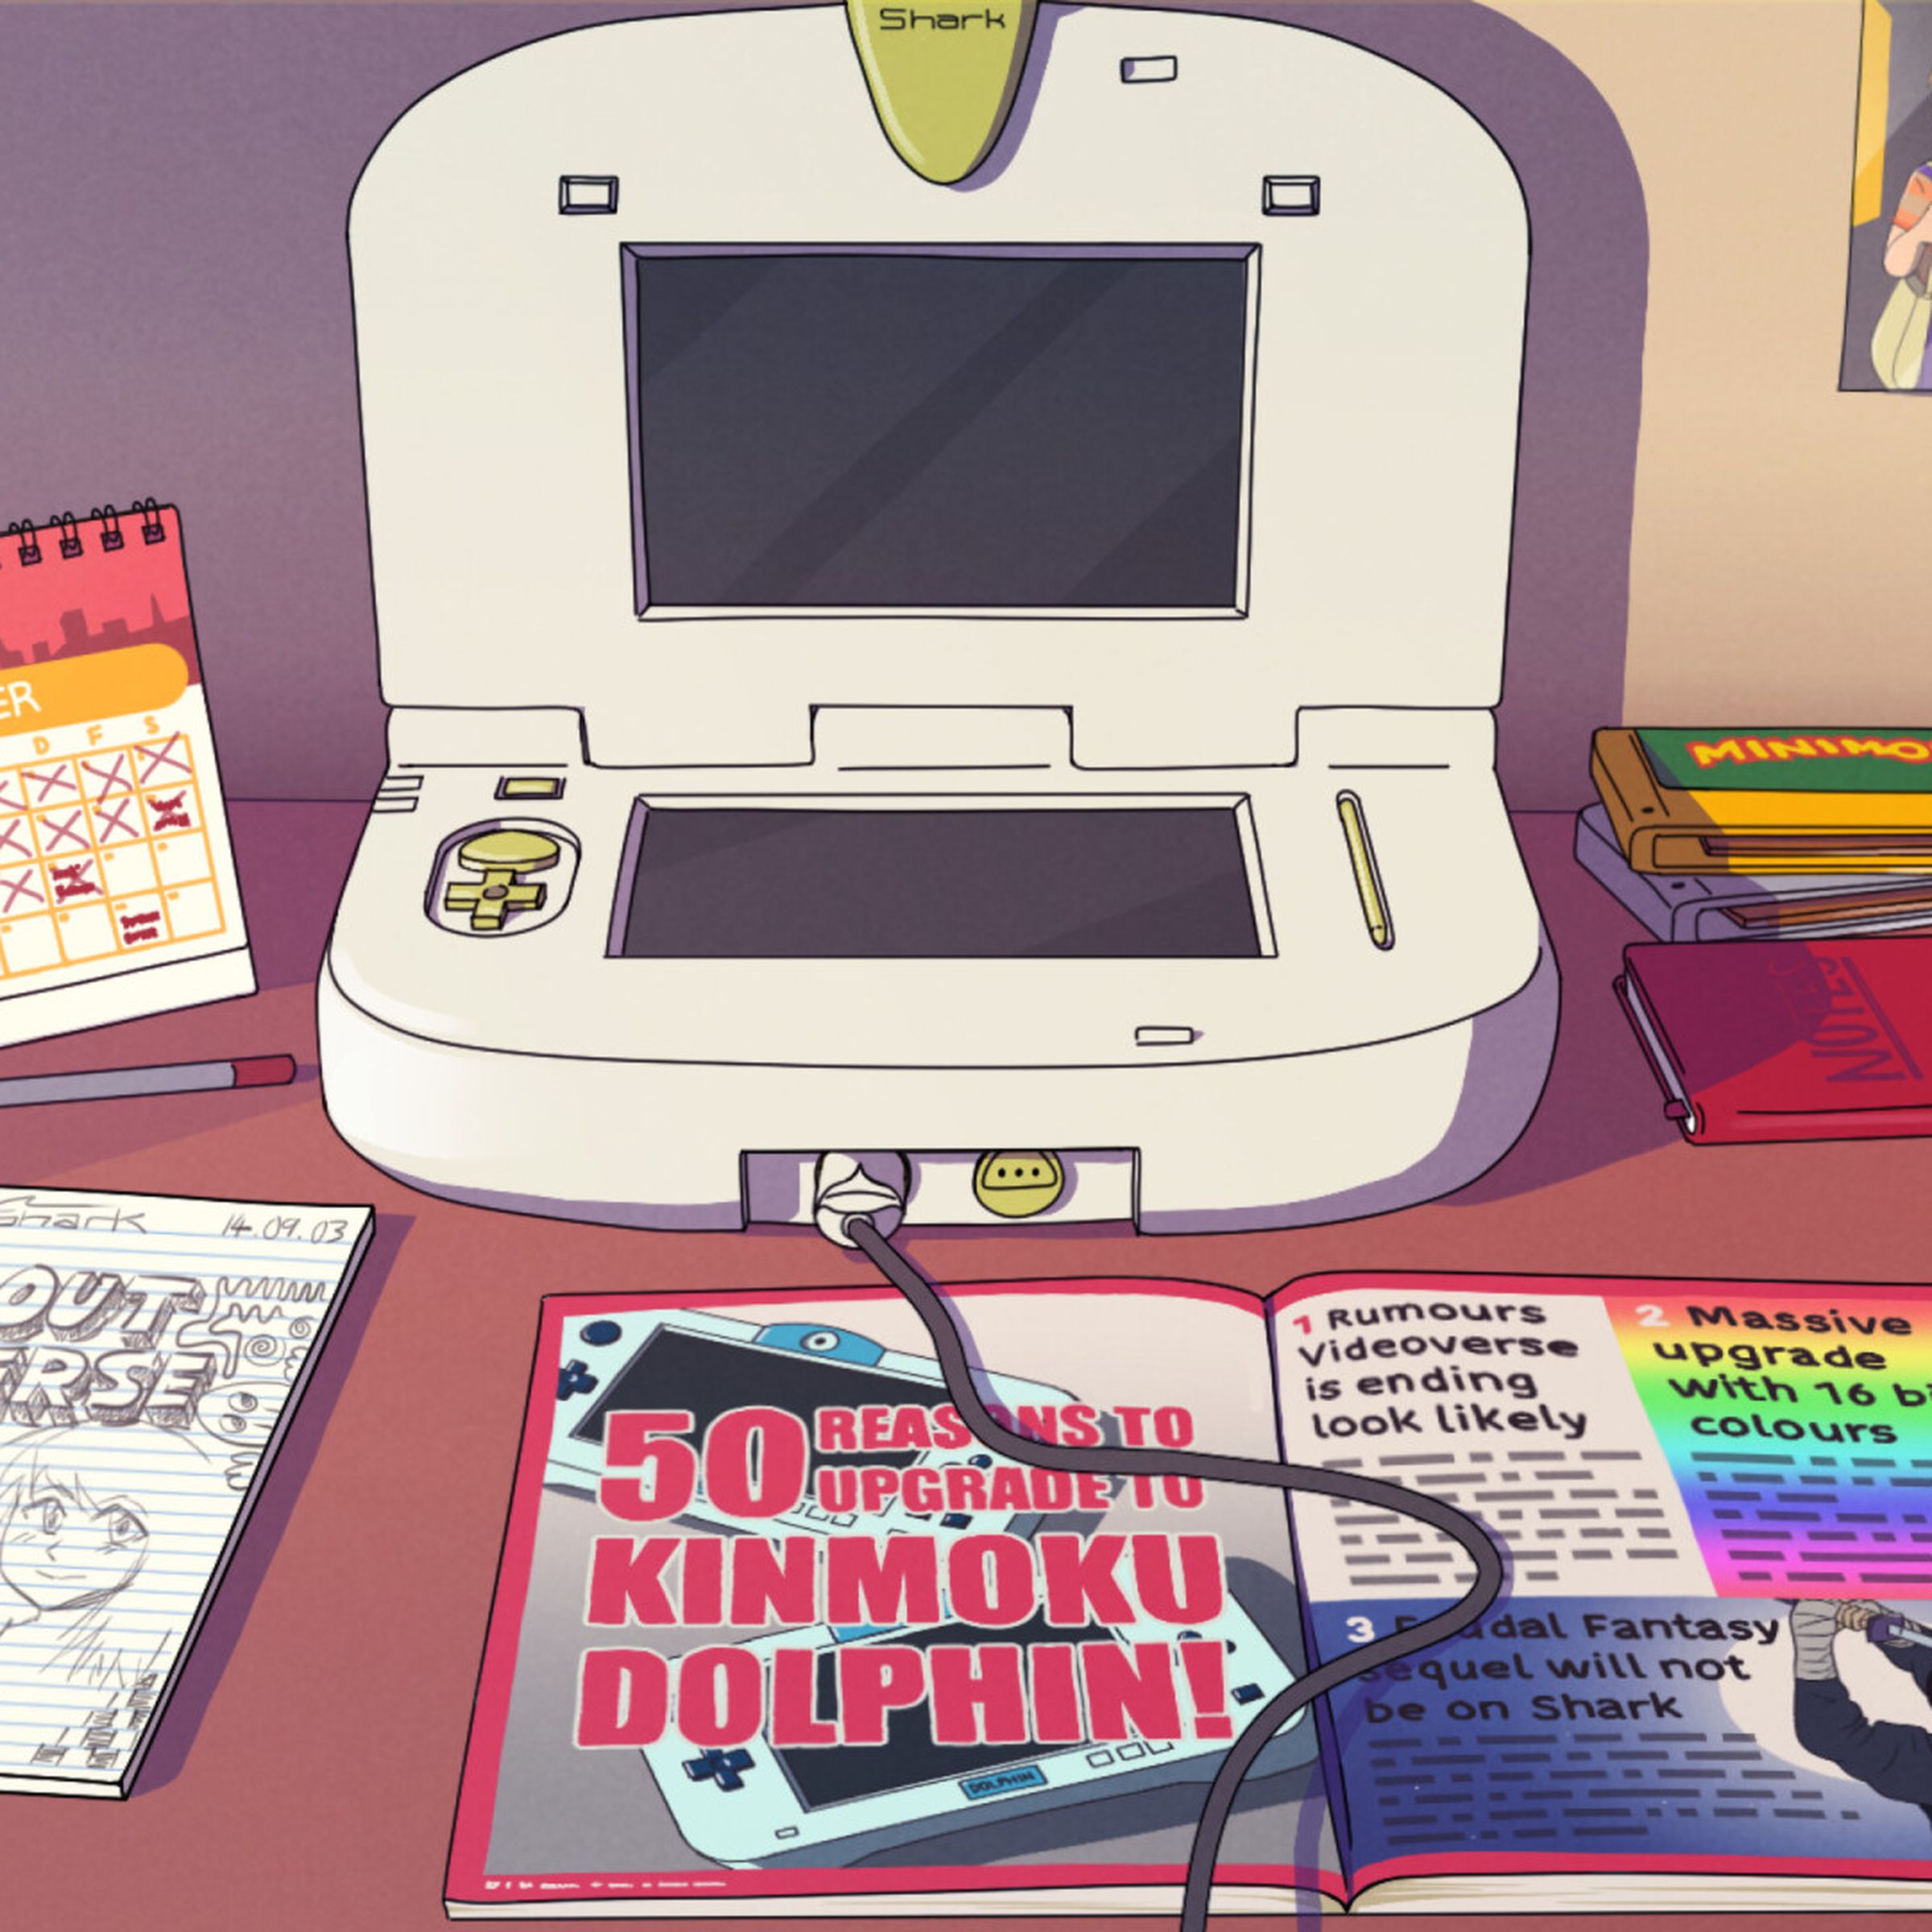 A screenshot from the video game Videoverse, depicting a cartoon desk with a laptop and various other knick knacks.